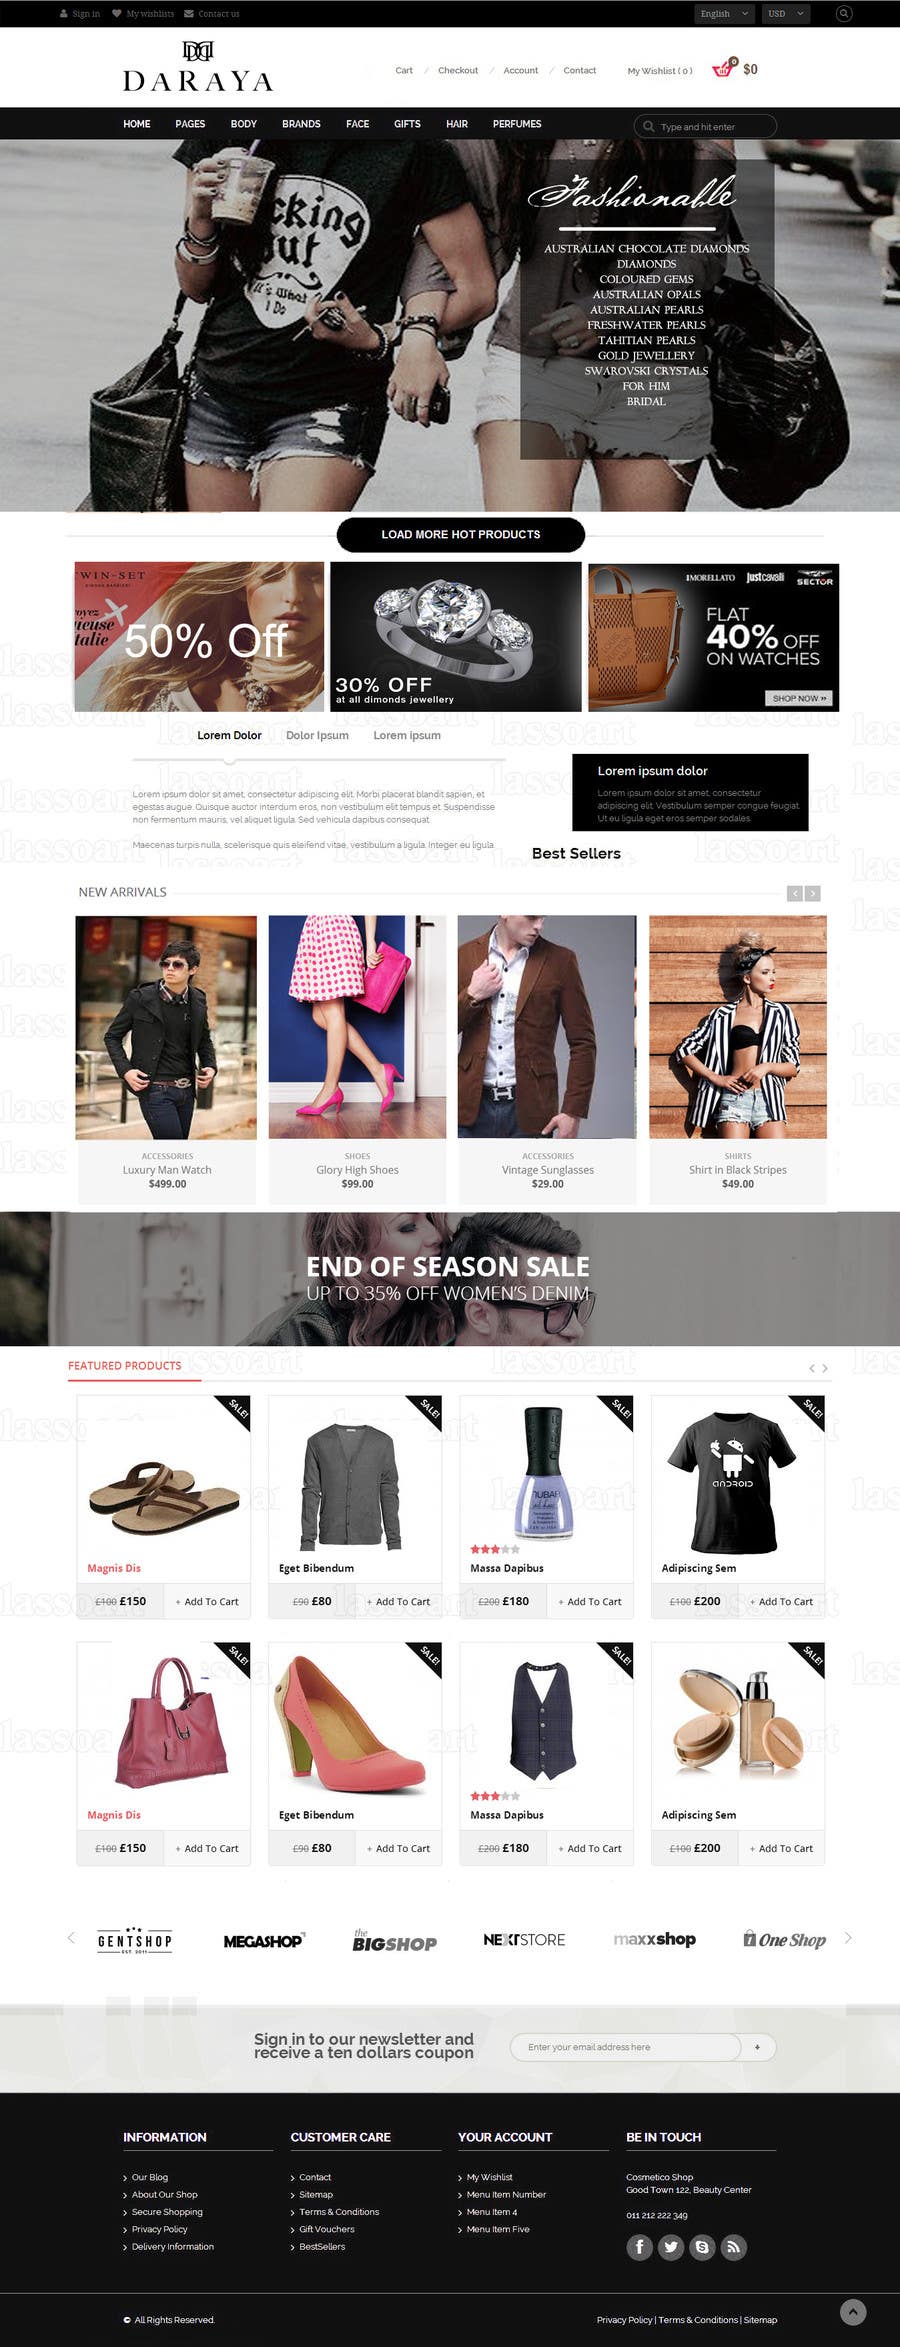 Proposition n°12 du concours                                                 LUXURY FASHION BRAND - Build a Website and Online Store
                                            